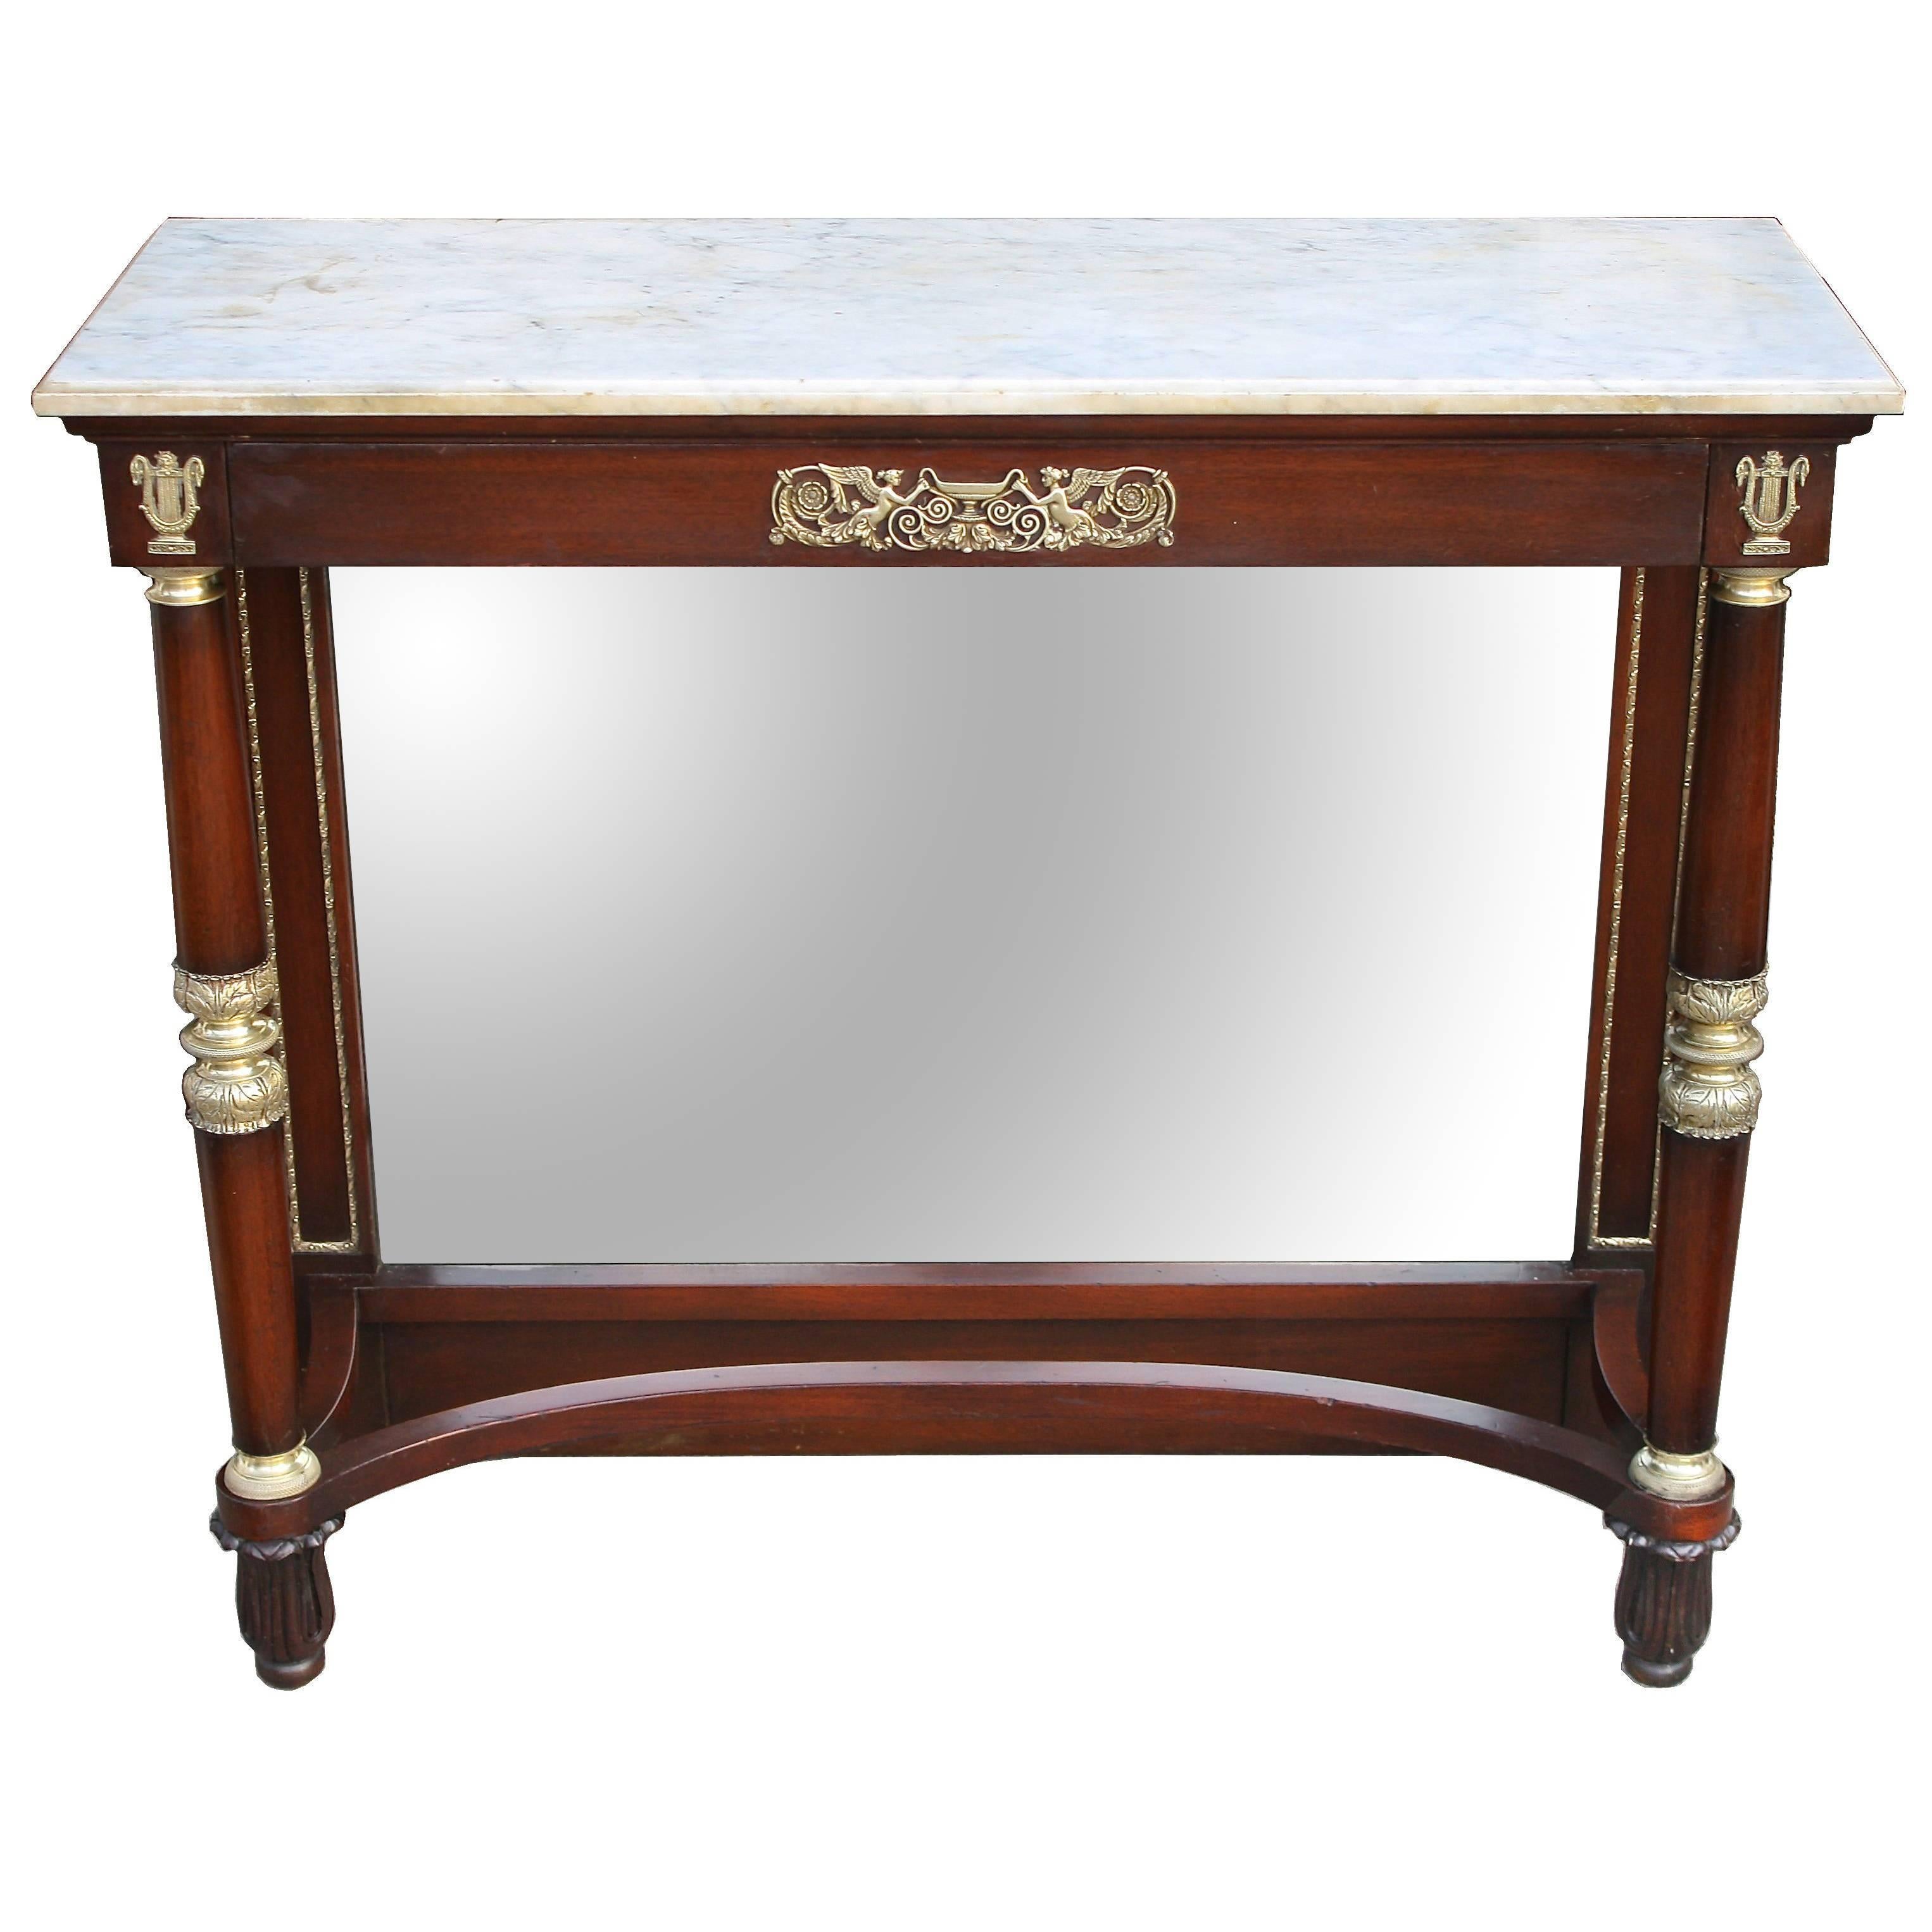 French Restauration Period Pier Table For Sale